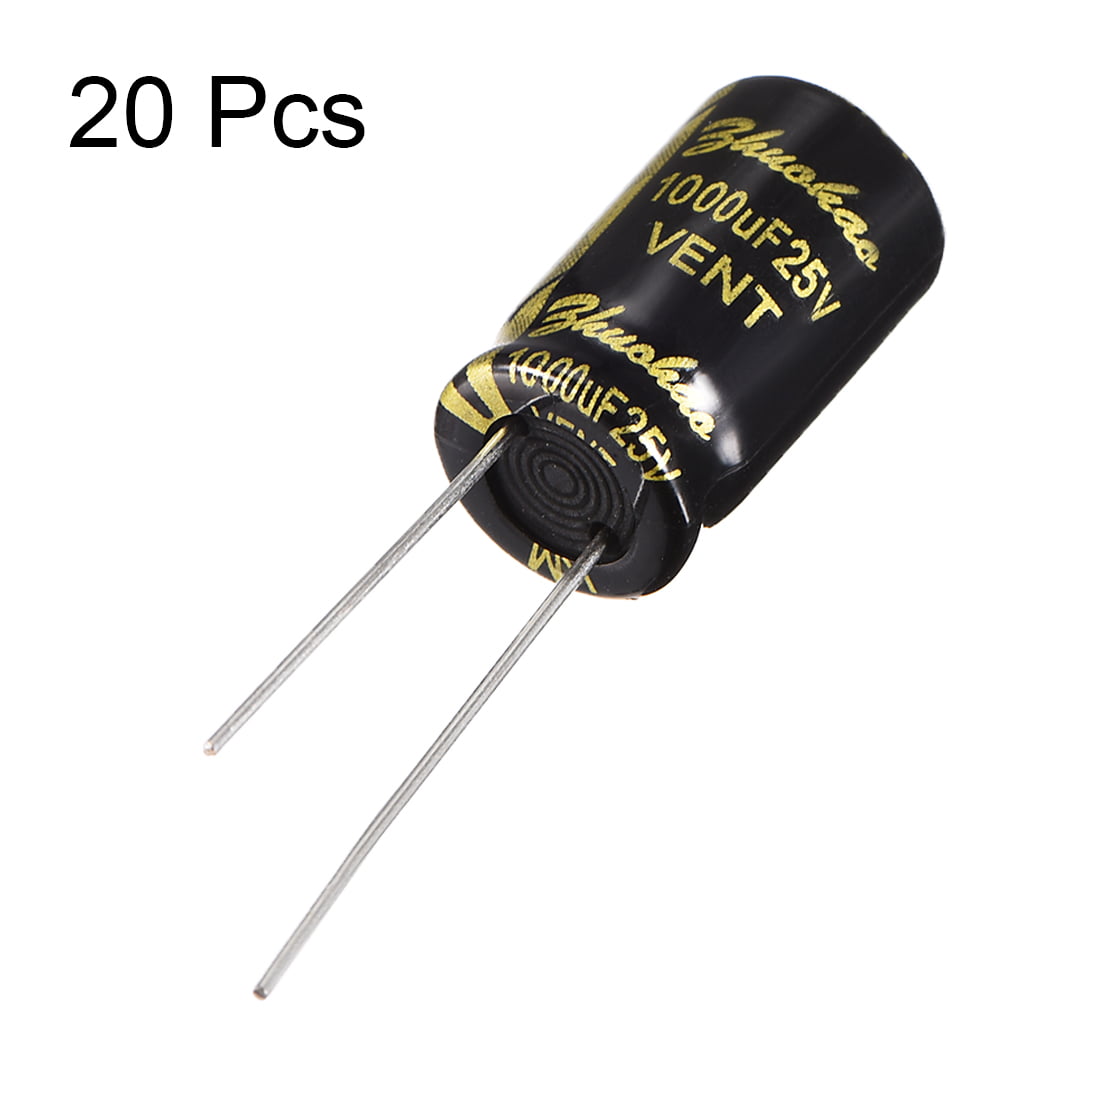 Pack of 10 Pieces Aluminum Electrolytic Capacitor 1000uf 25v 10x17 1000uf 25V Capacitor 